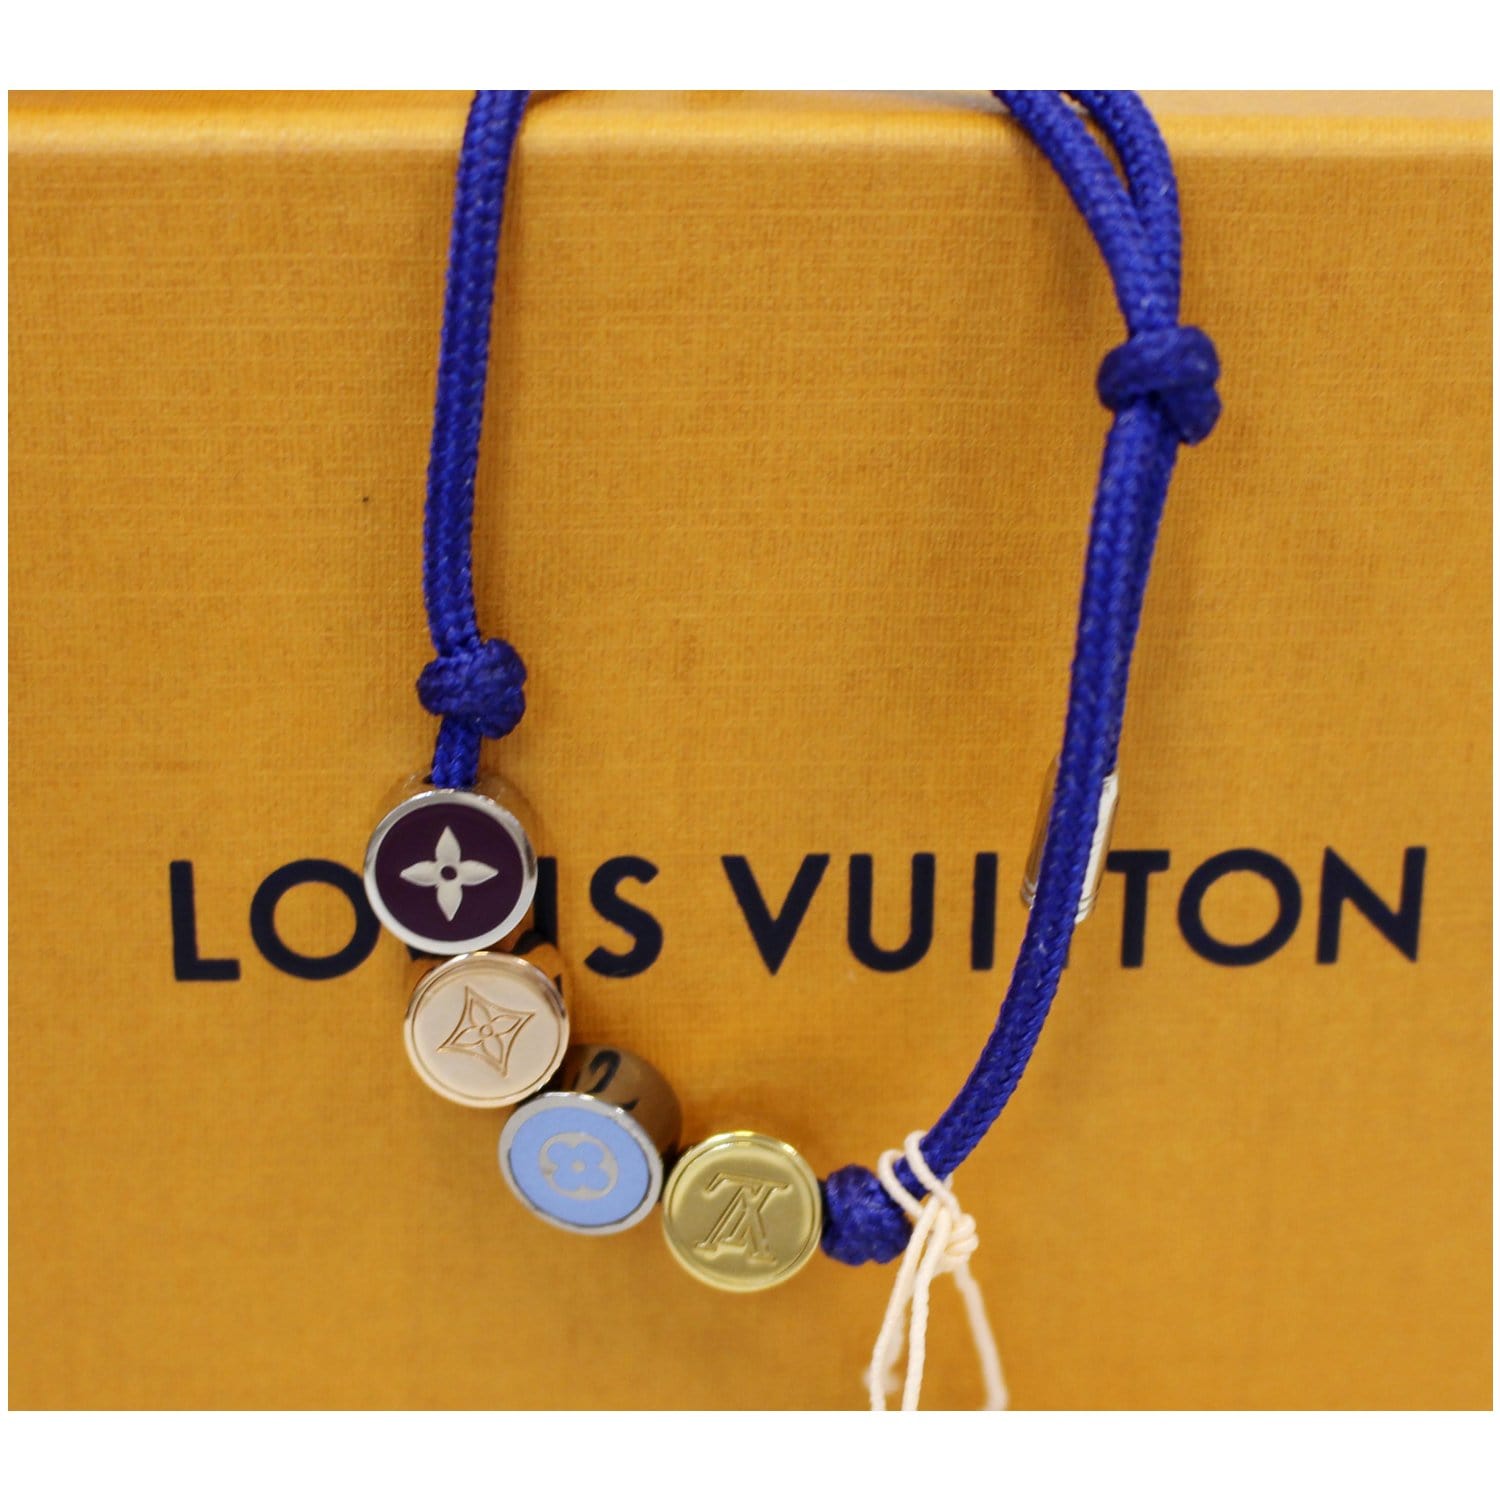 NEW authentic Louis Vuitton luggage tag beaded necklace  Louis vuitton  luggage tag, Louis vuitton luggage, Beaded necklace